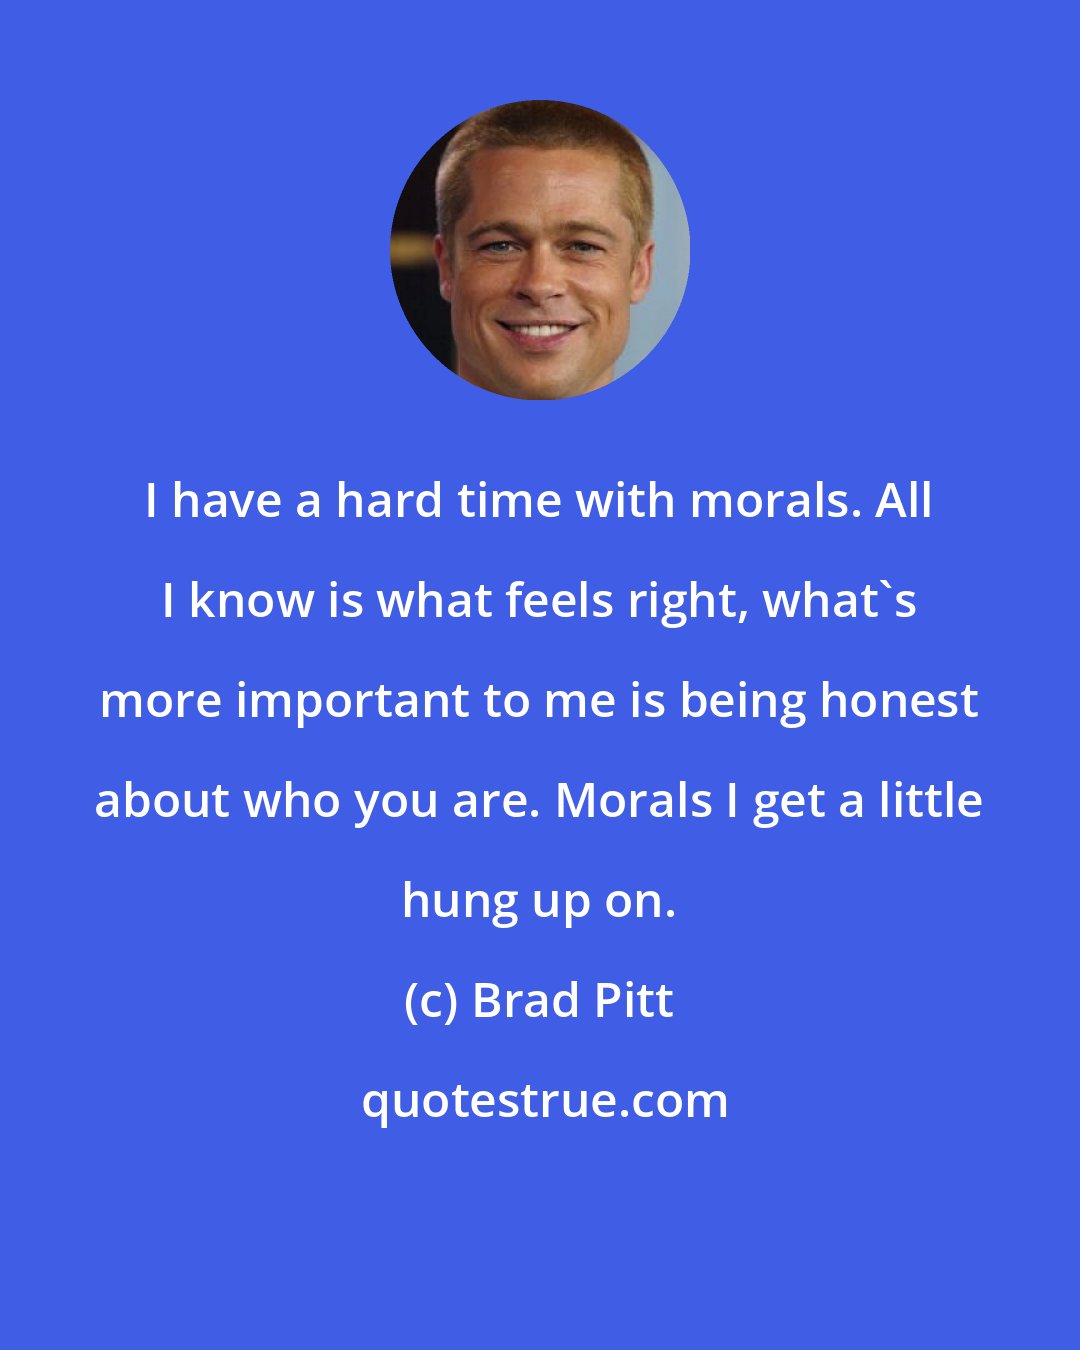 Brad Pitt: I have a hard time with morals. All I know is what feels right, what's more important to me is being honest about who you are. Morals I get a little hung up on.